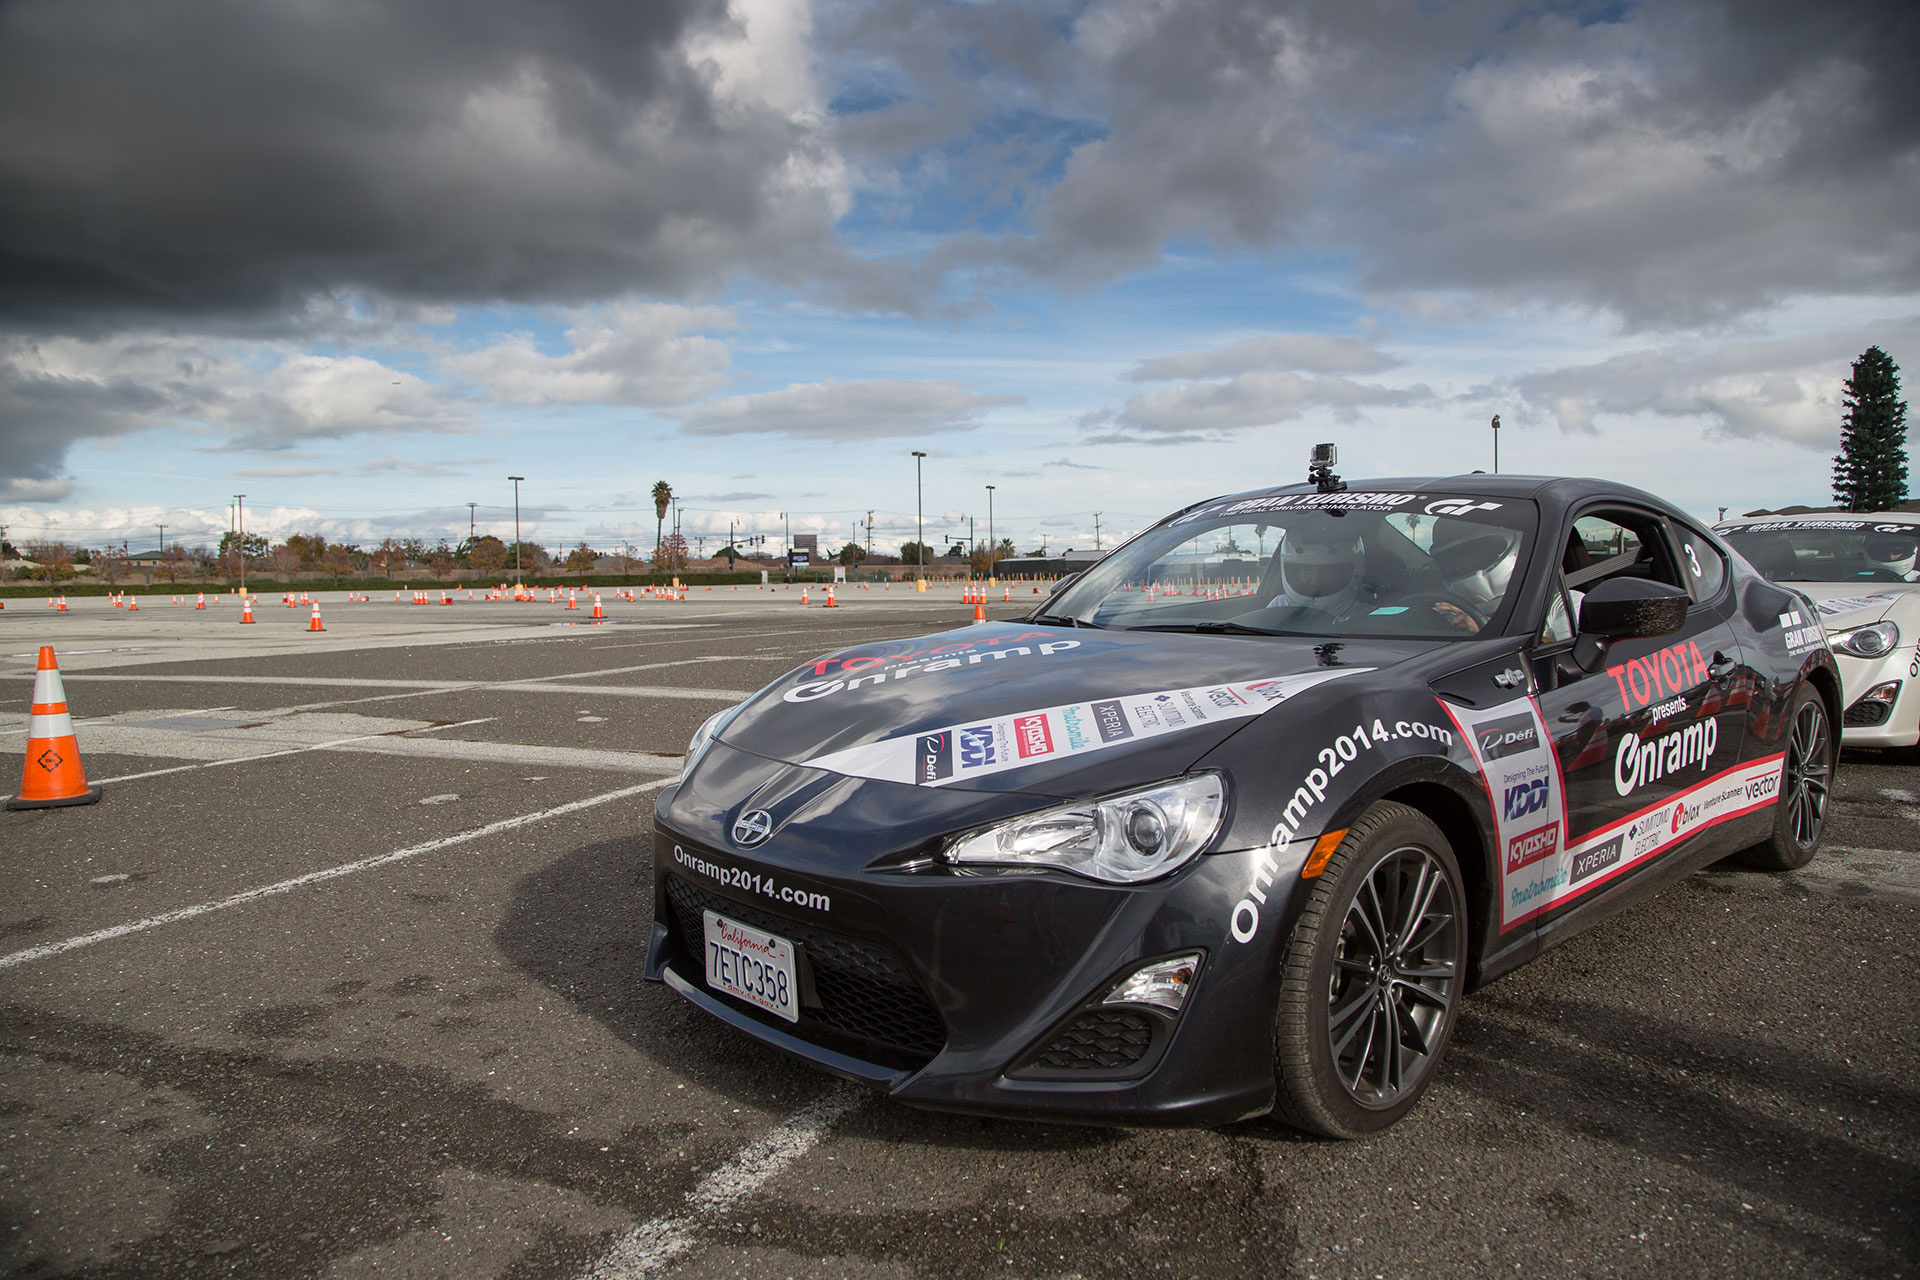 Scion FR-S (Toyota 86) used in the Onramp 2014 Challenge 3